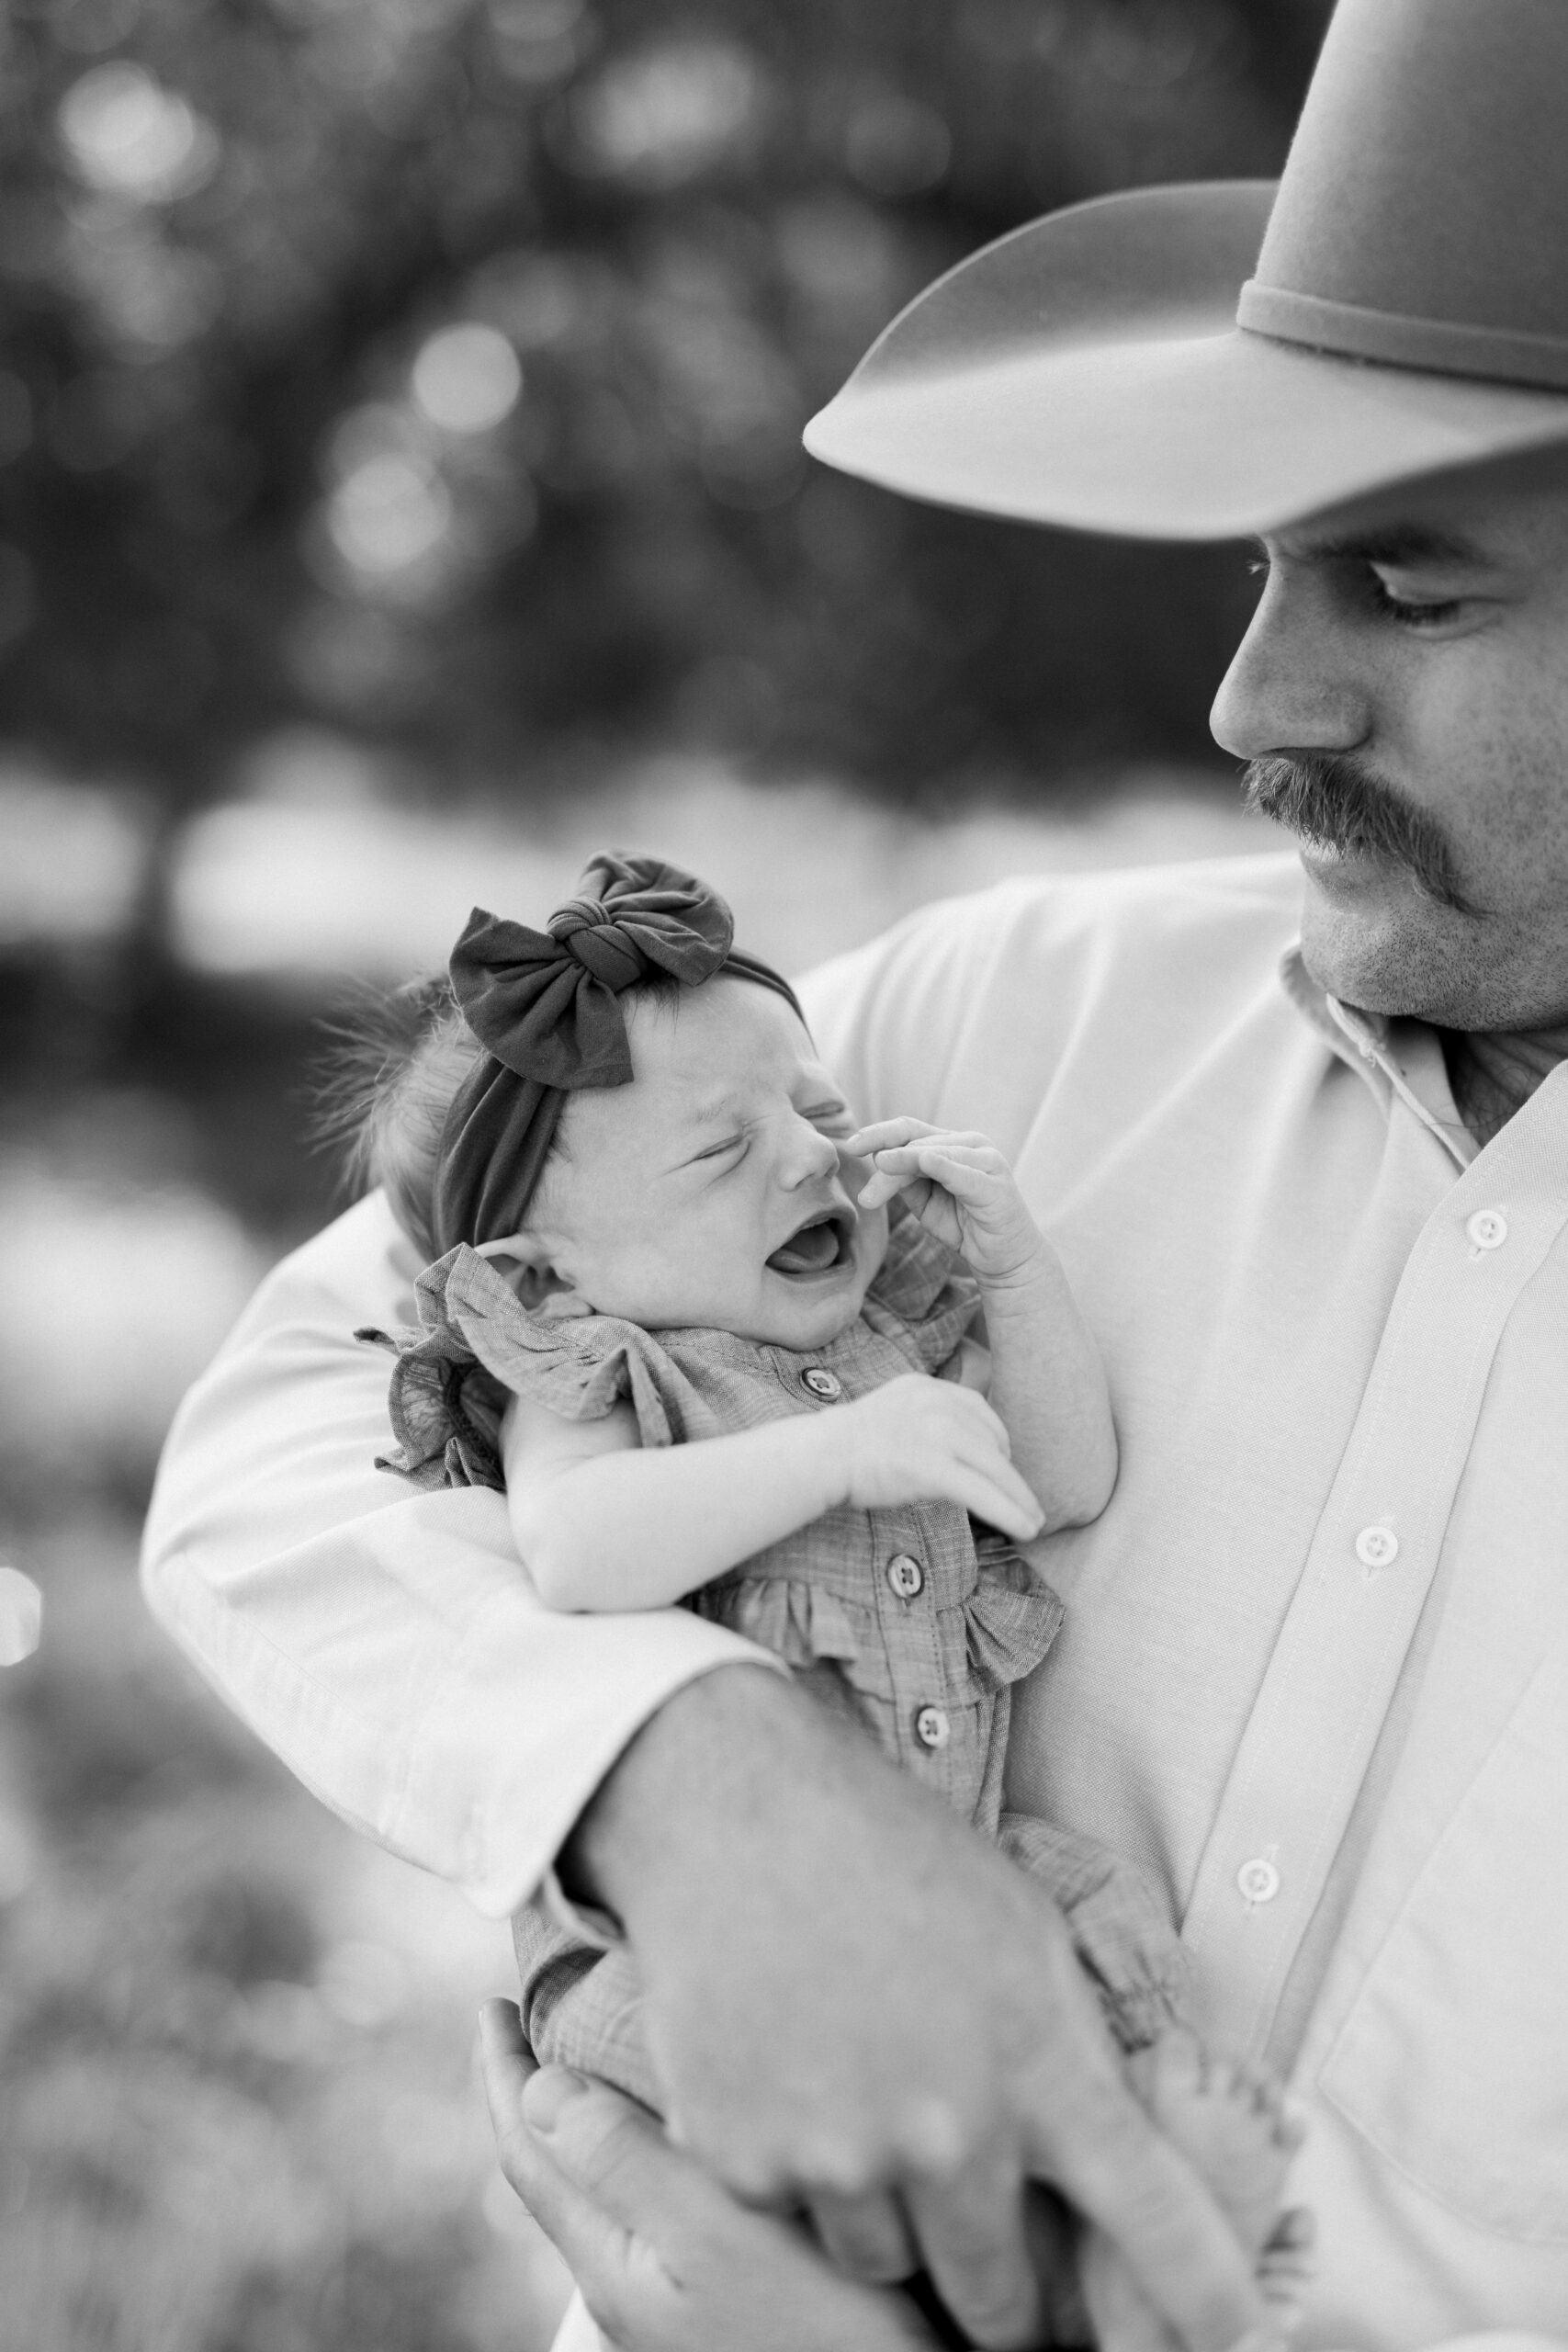 Rancher and dad holding his baby girl.